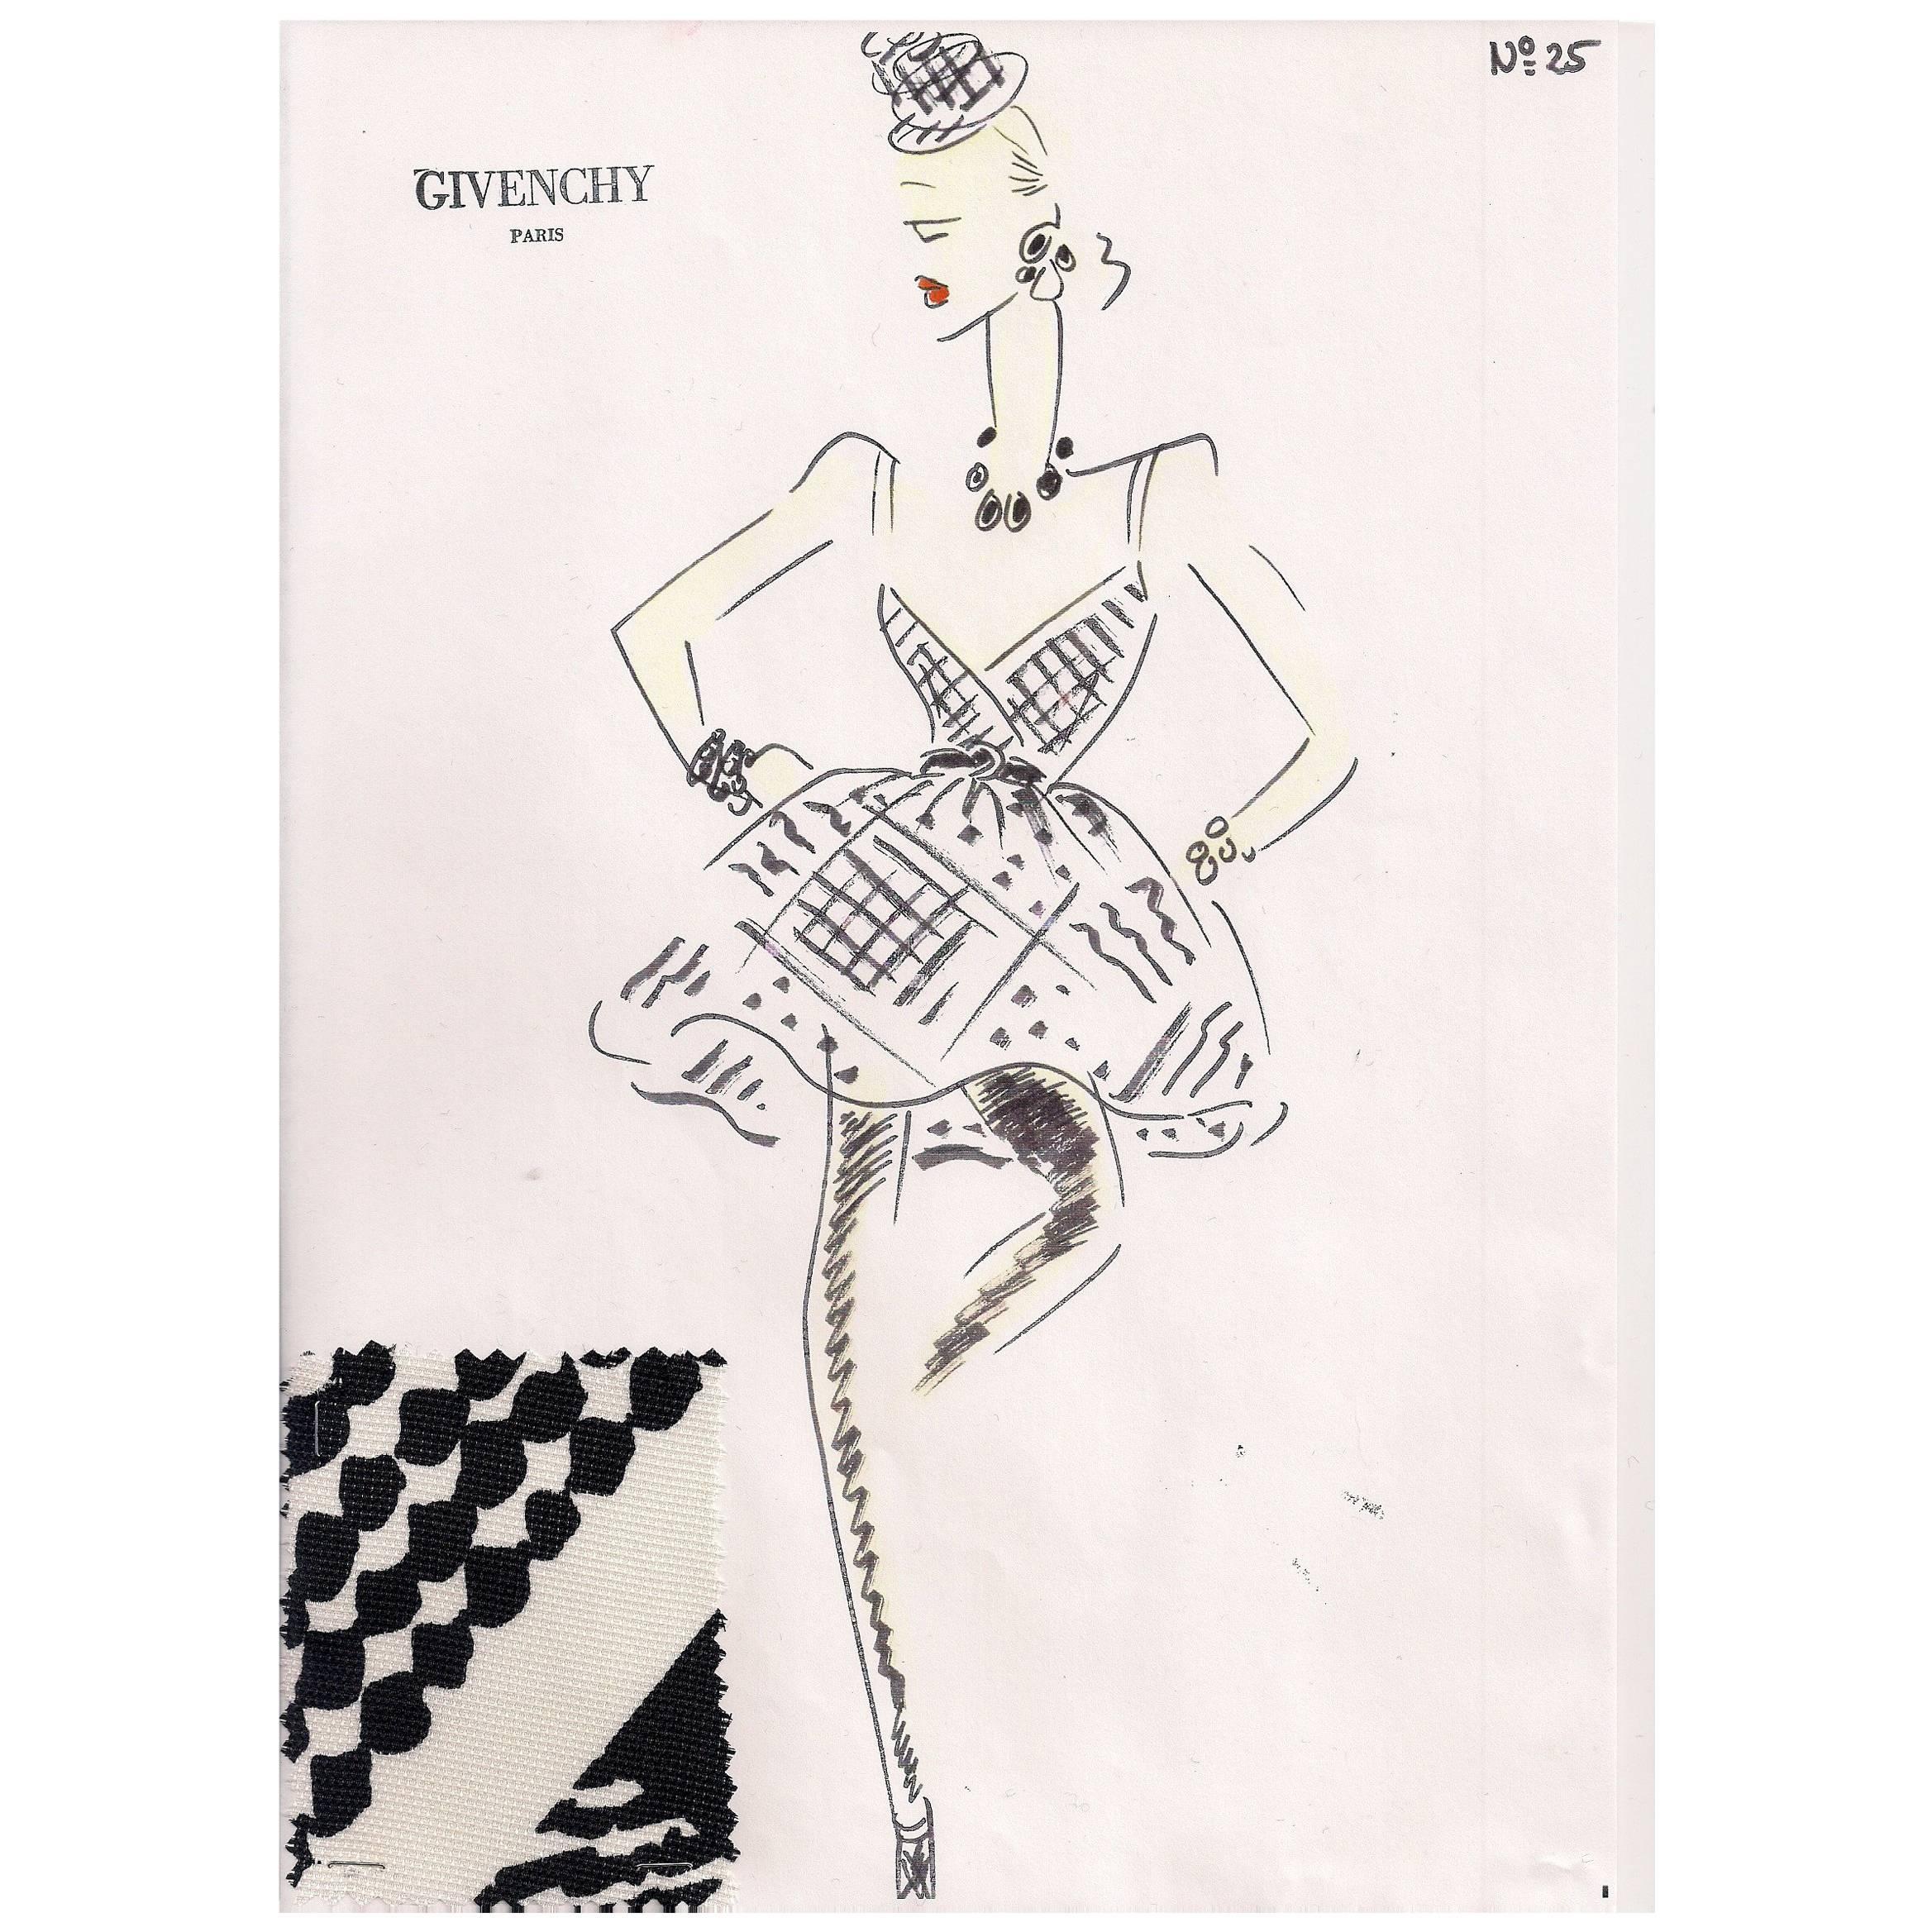 Givenchy Croquis of a Black and White Cocktail Dress with Attached Fabric Sample